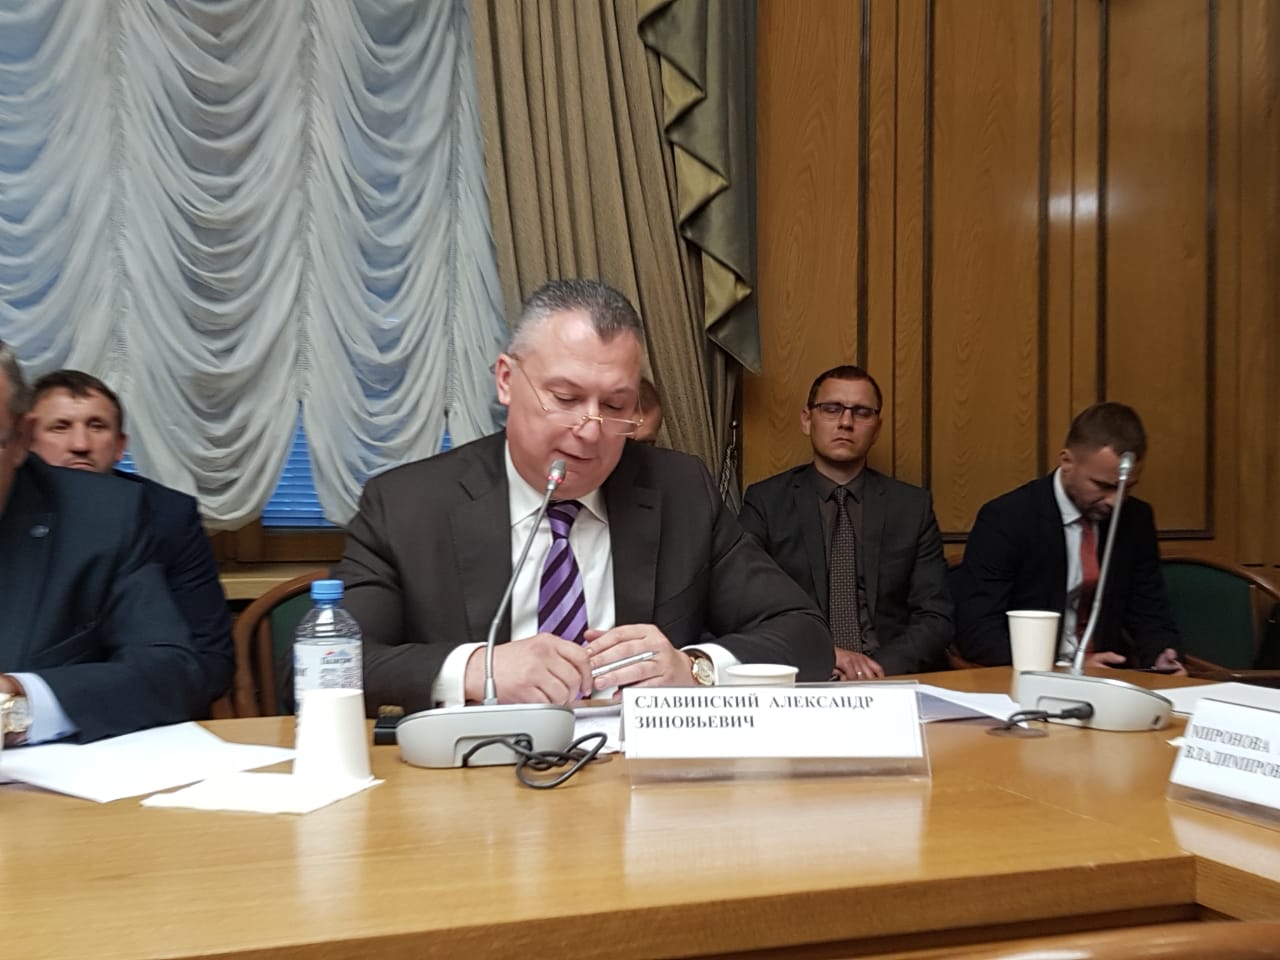 Alexander Slavinsky’s speech at the sitting of the Power Industry section of the Expert Council of the Just Russia political party in the State Duma of Russian Federation